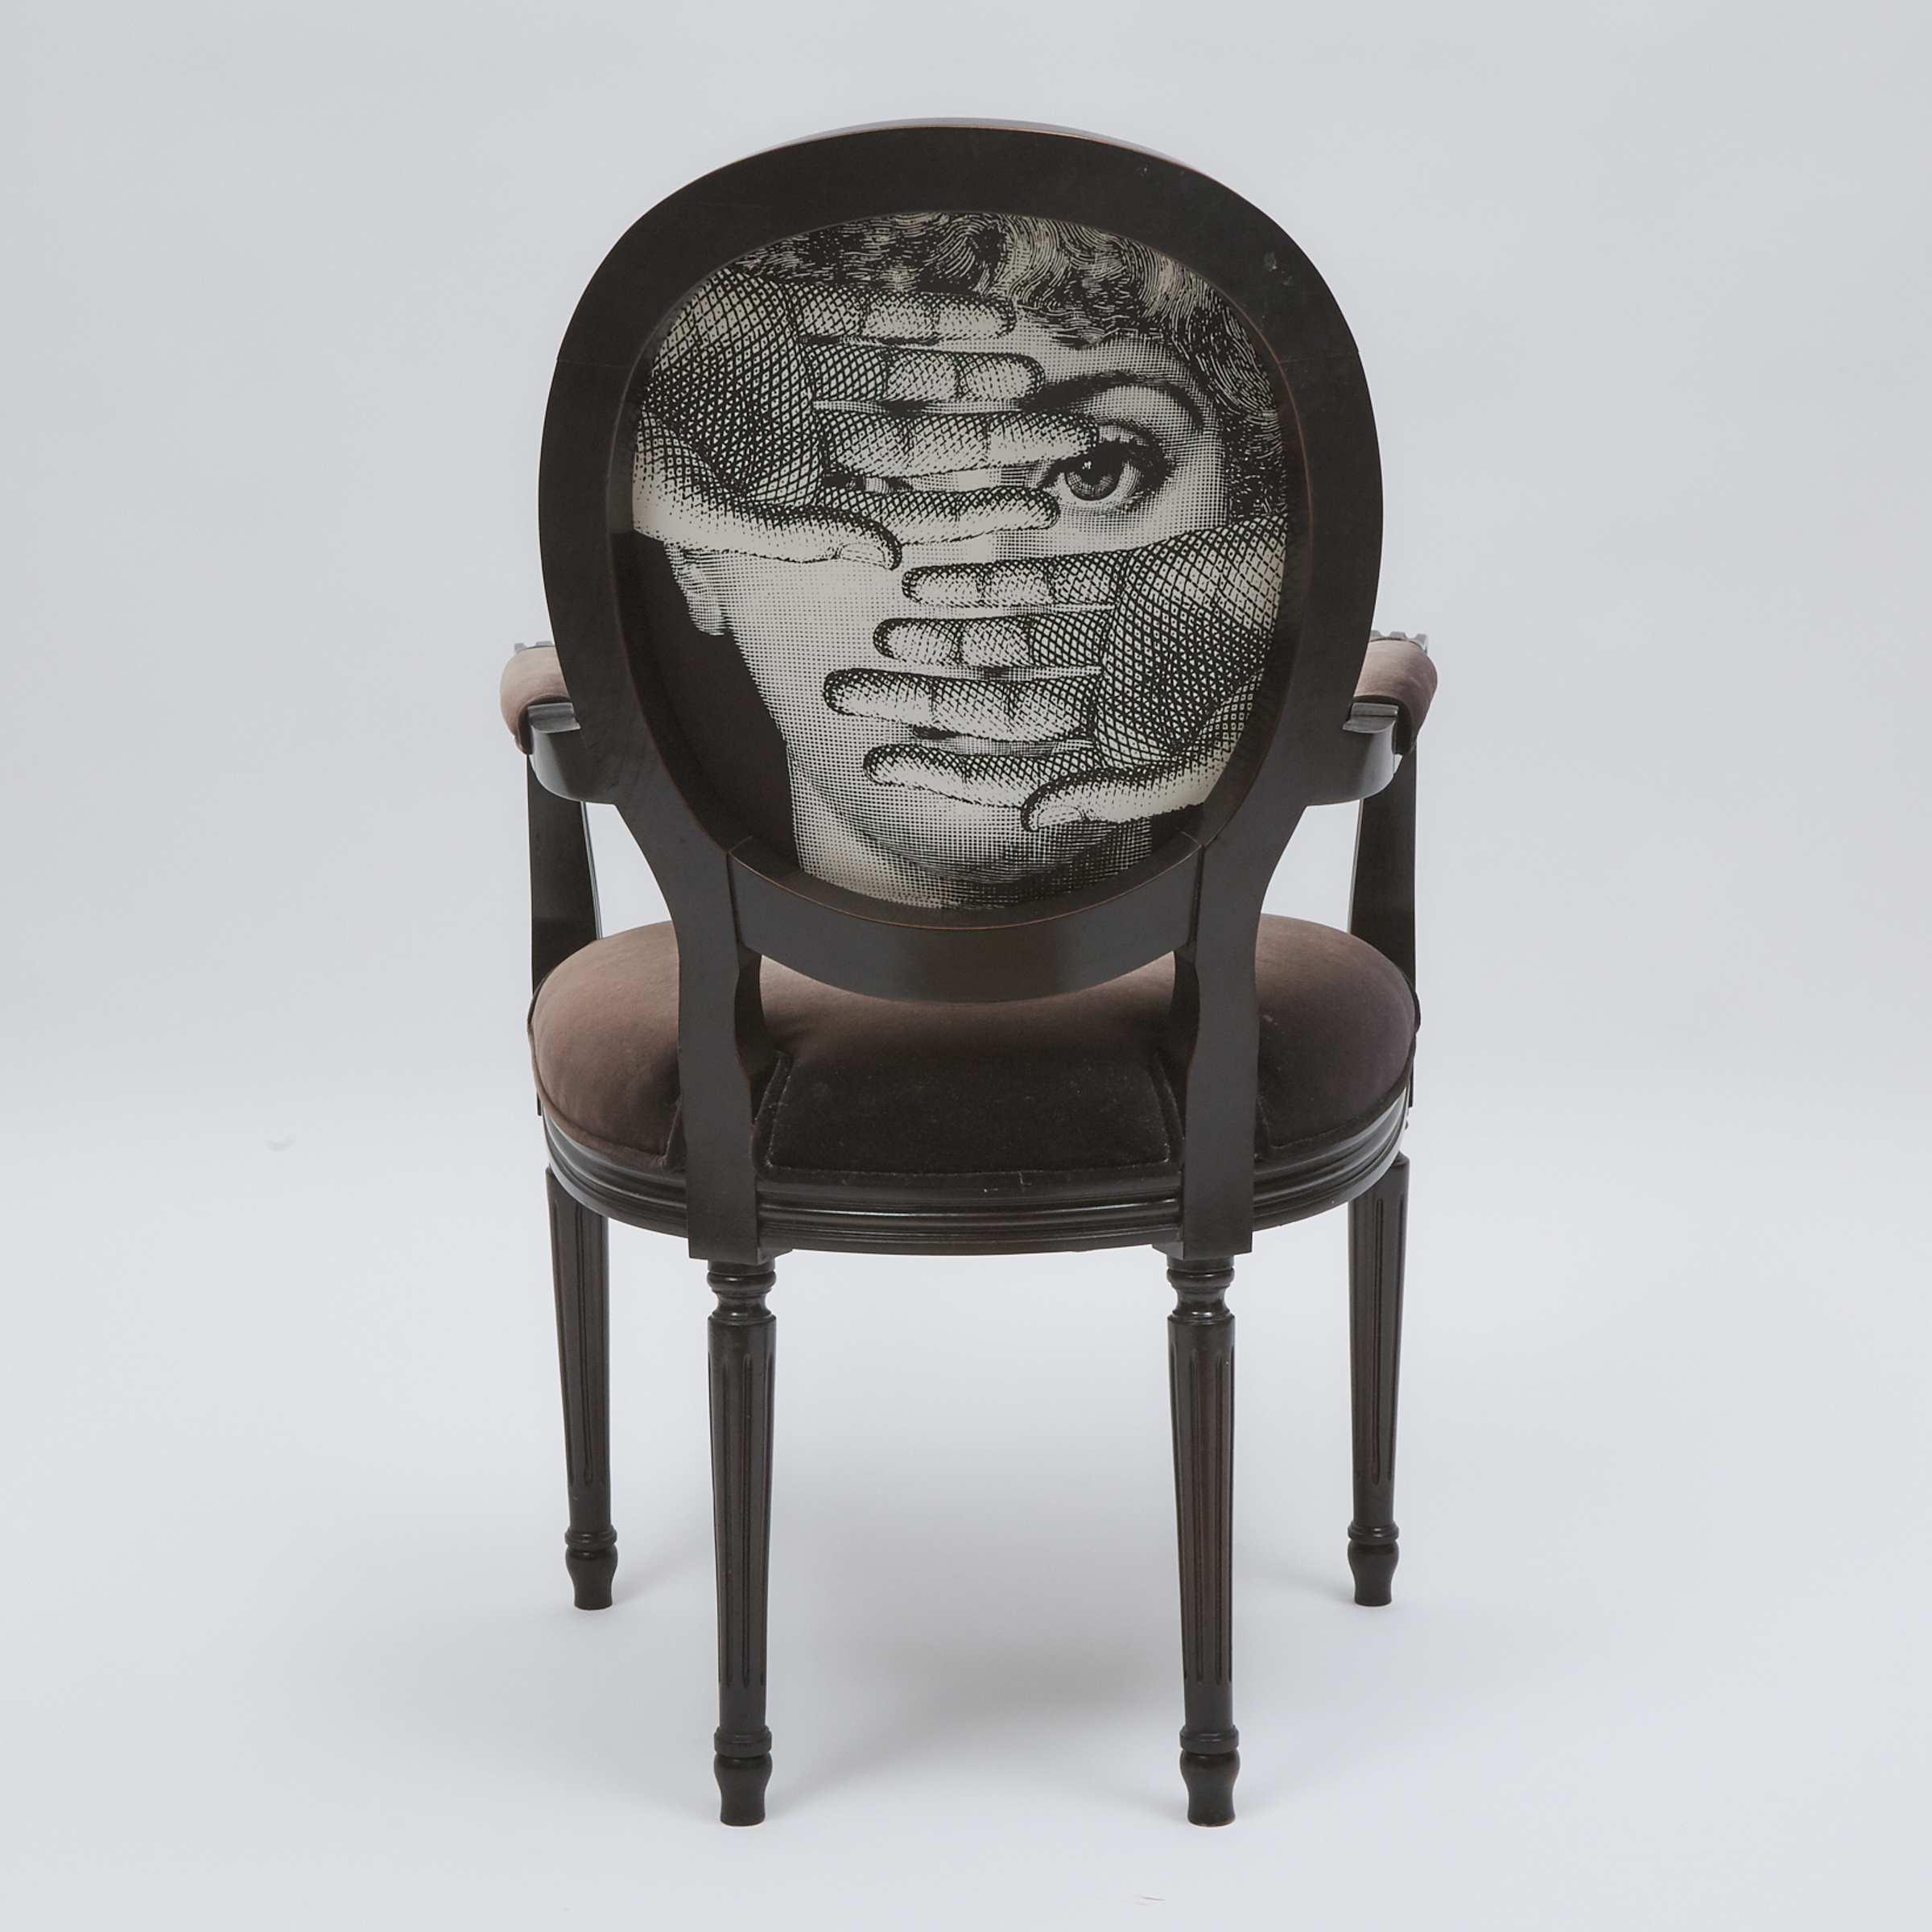 Louis XIV Style Ebonized Fauteuil with Fornasetti Upholstery, 20th century